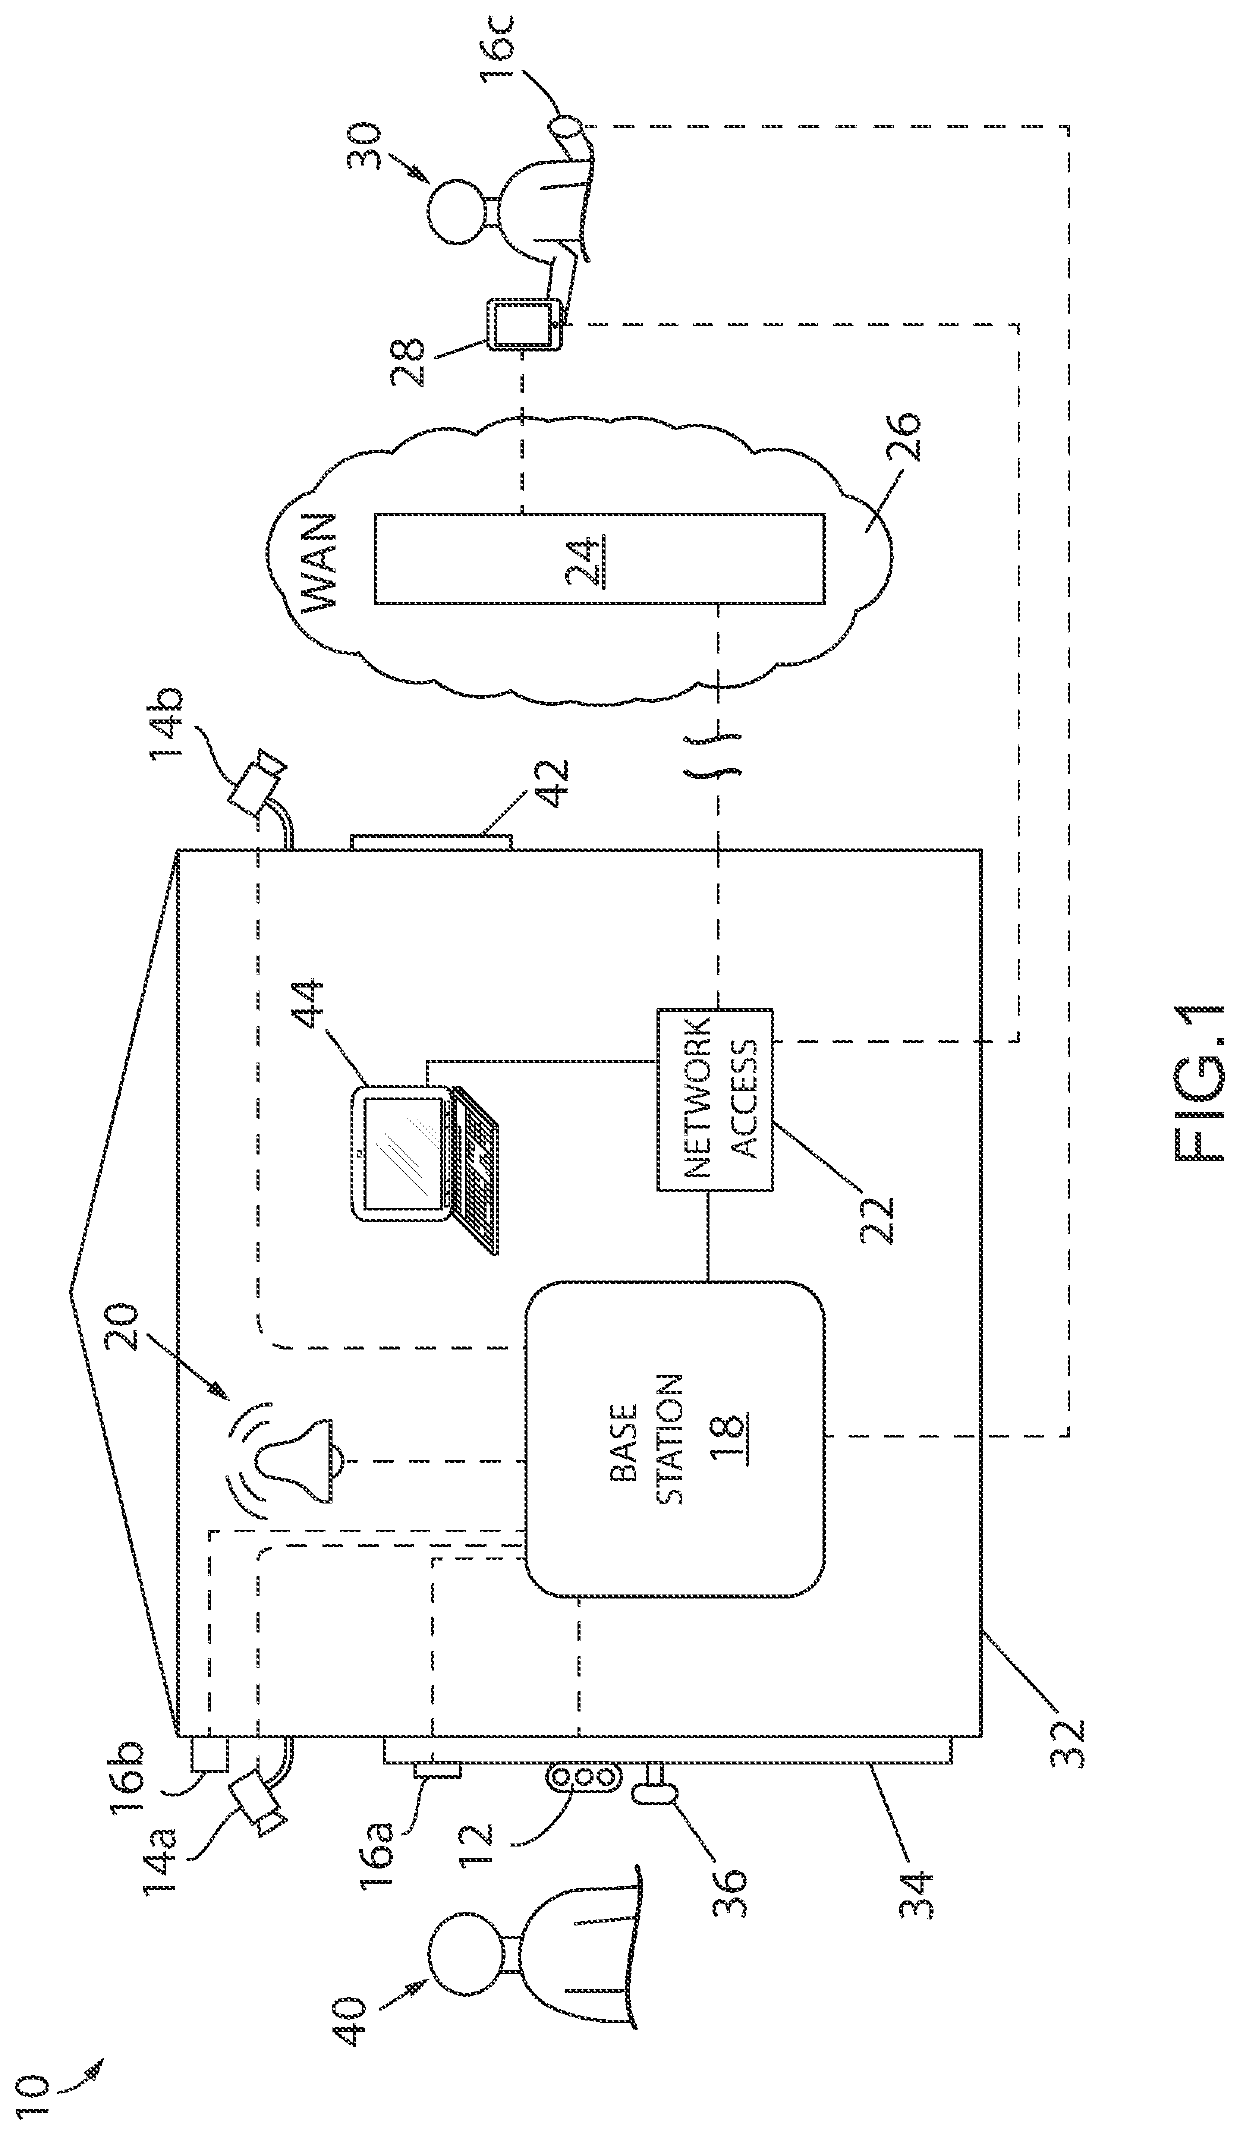 Electronic Security System Having Wireless Security Devices